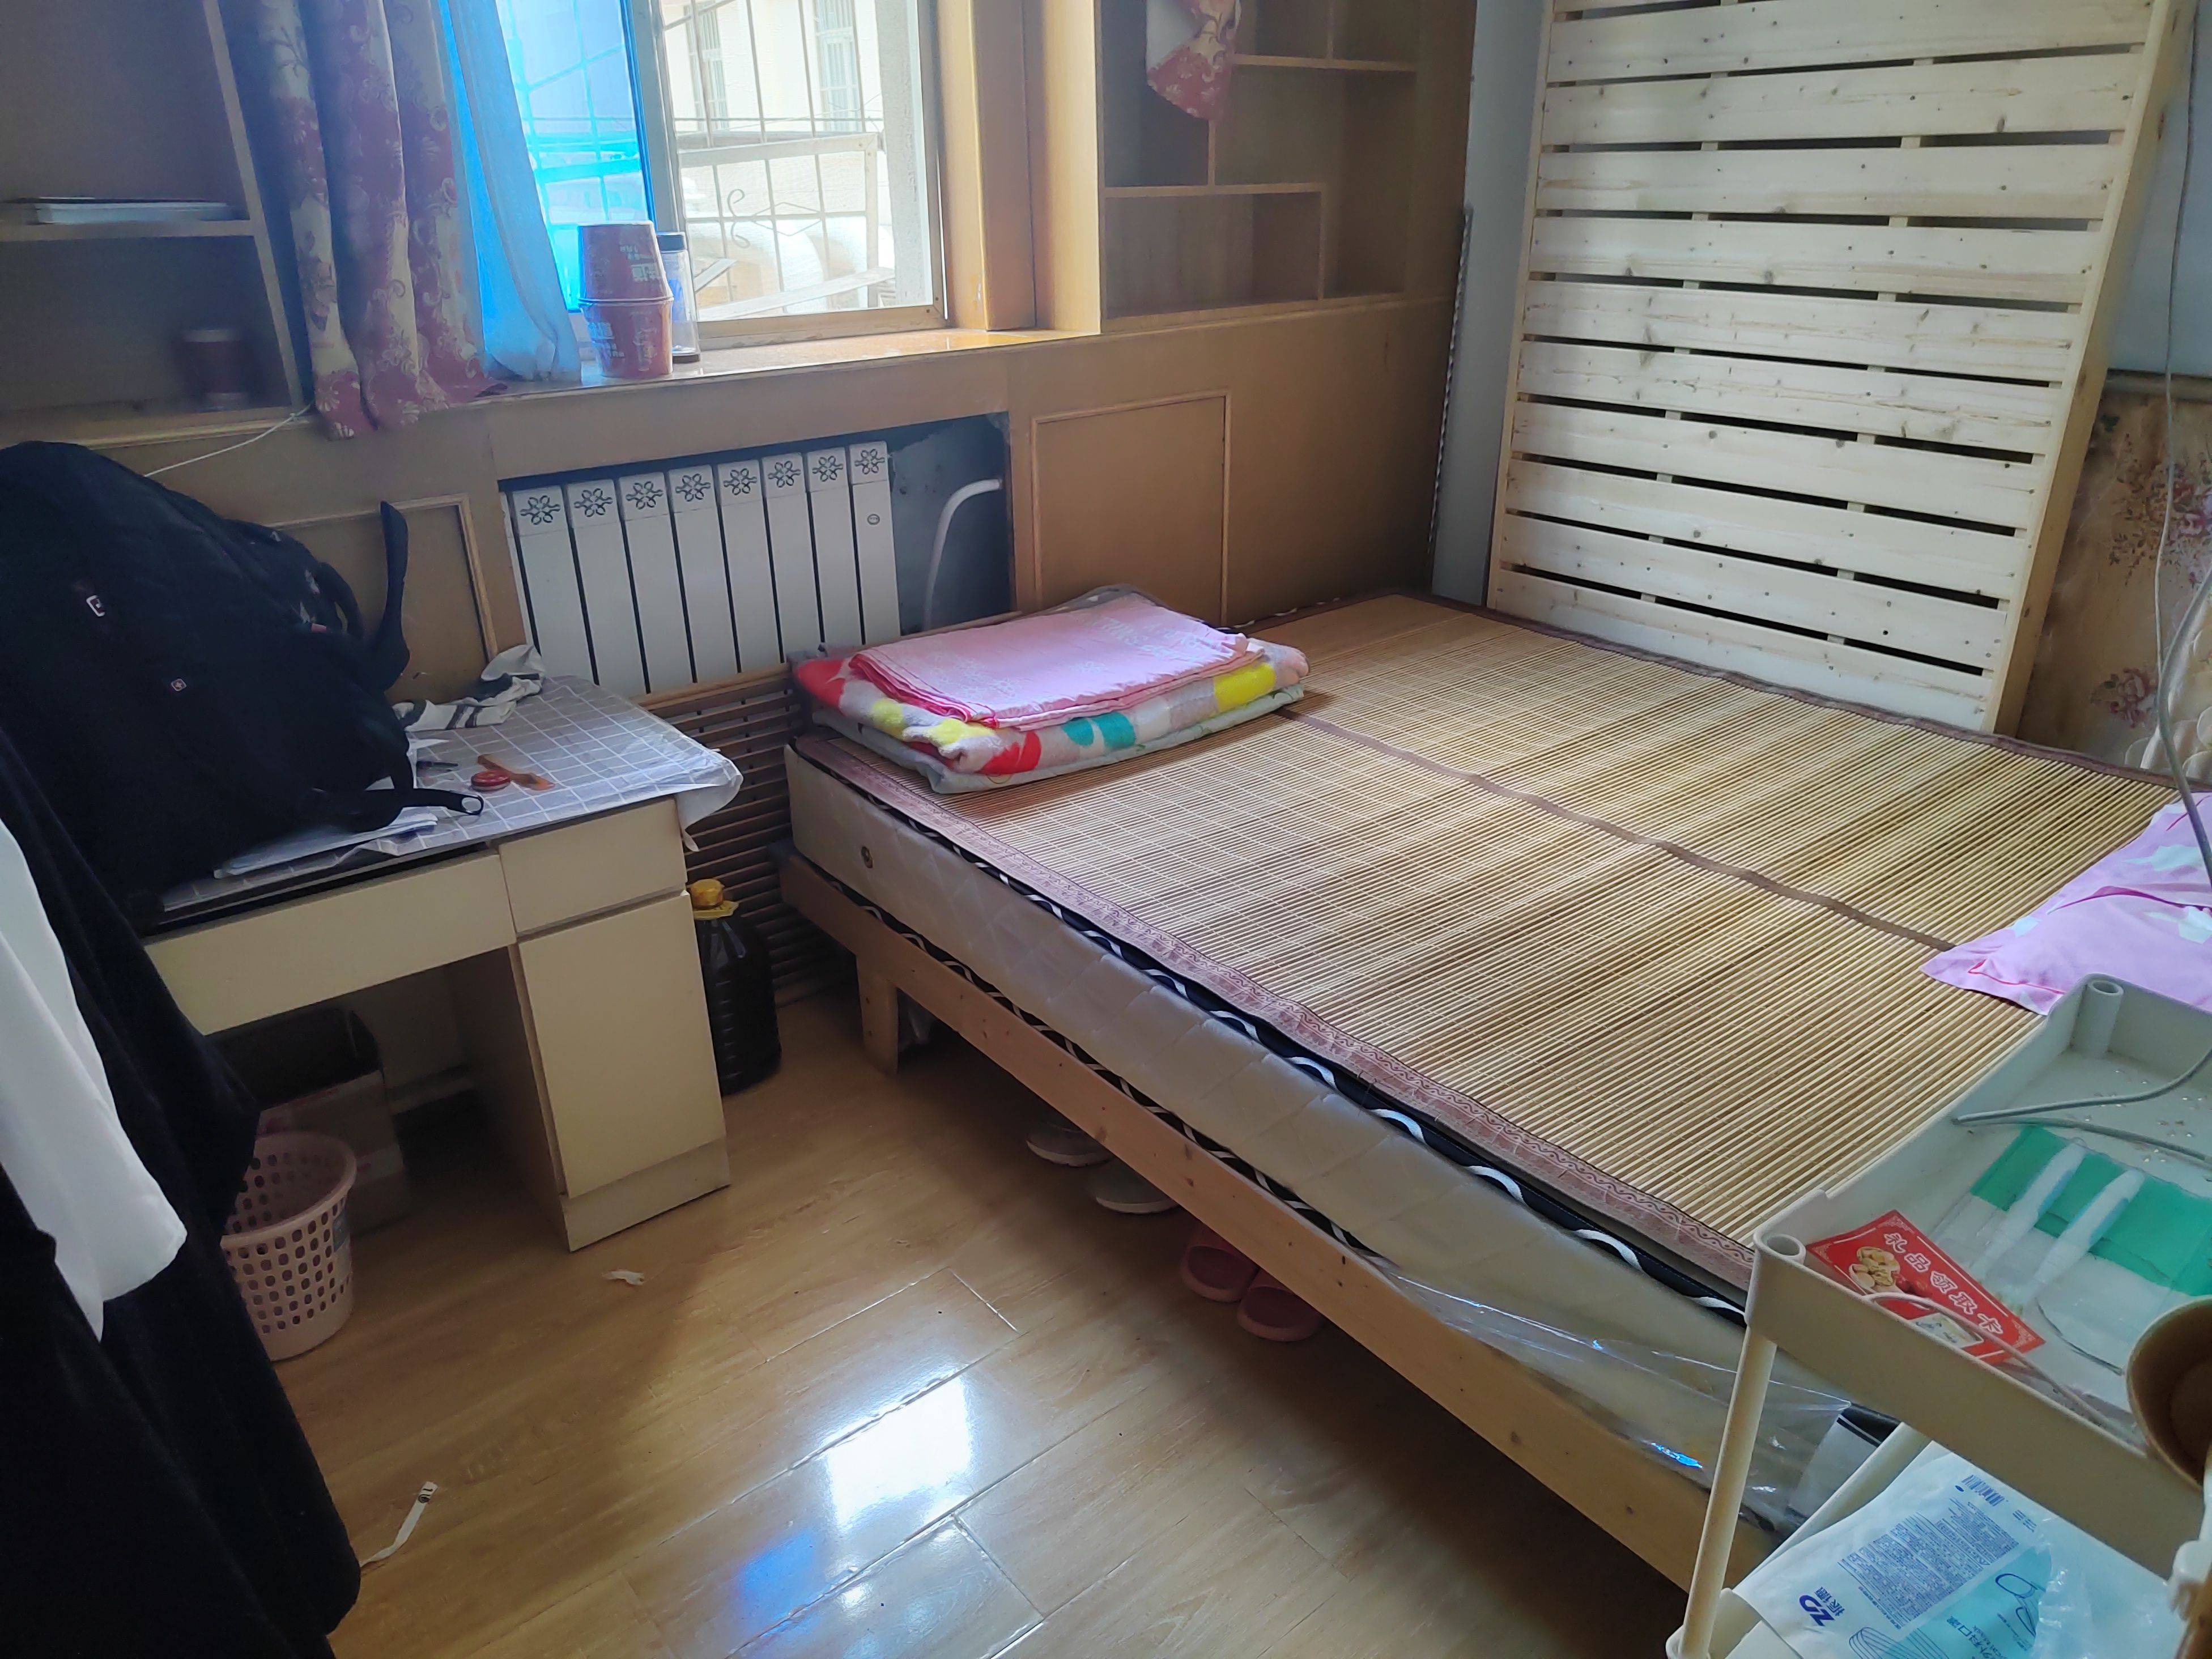 Xi'An-Xincheng-Cozy Home,Clean&Comfy,No Gender Limit,Hustle & Bustle,“Friends”,Chilled